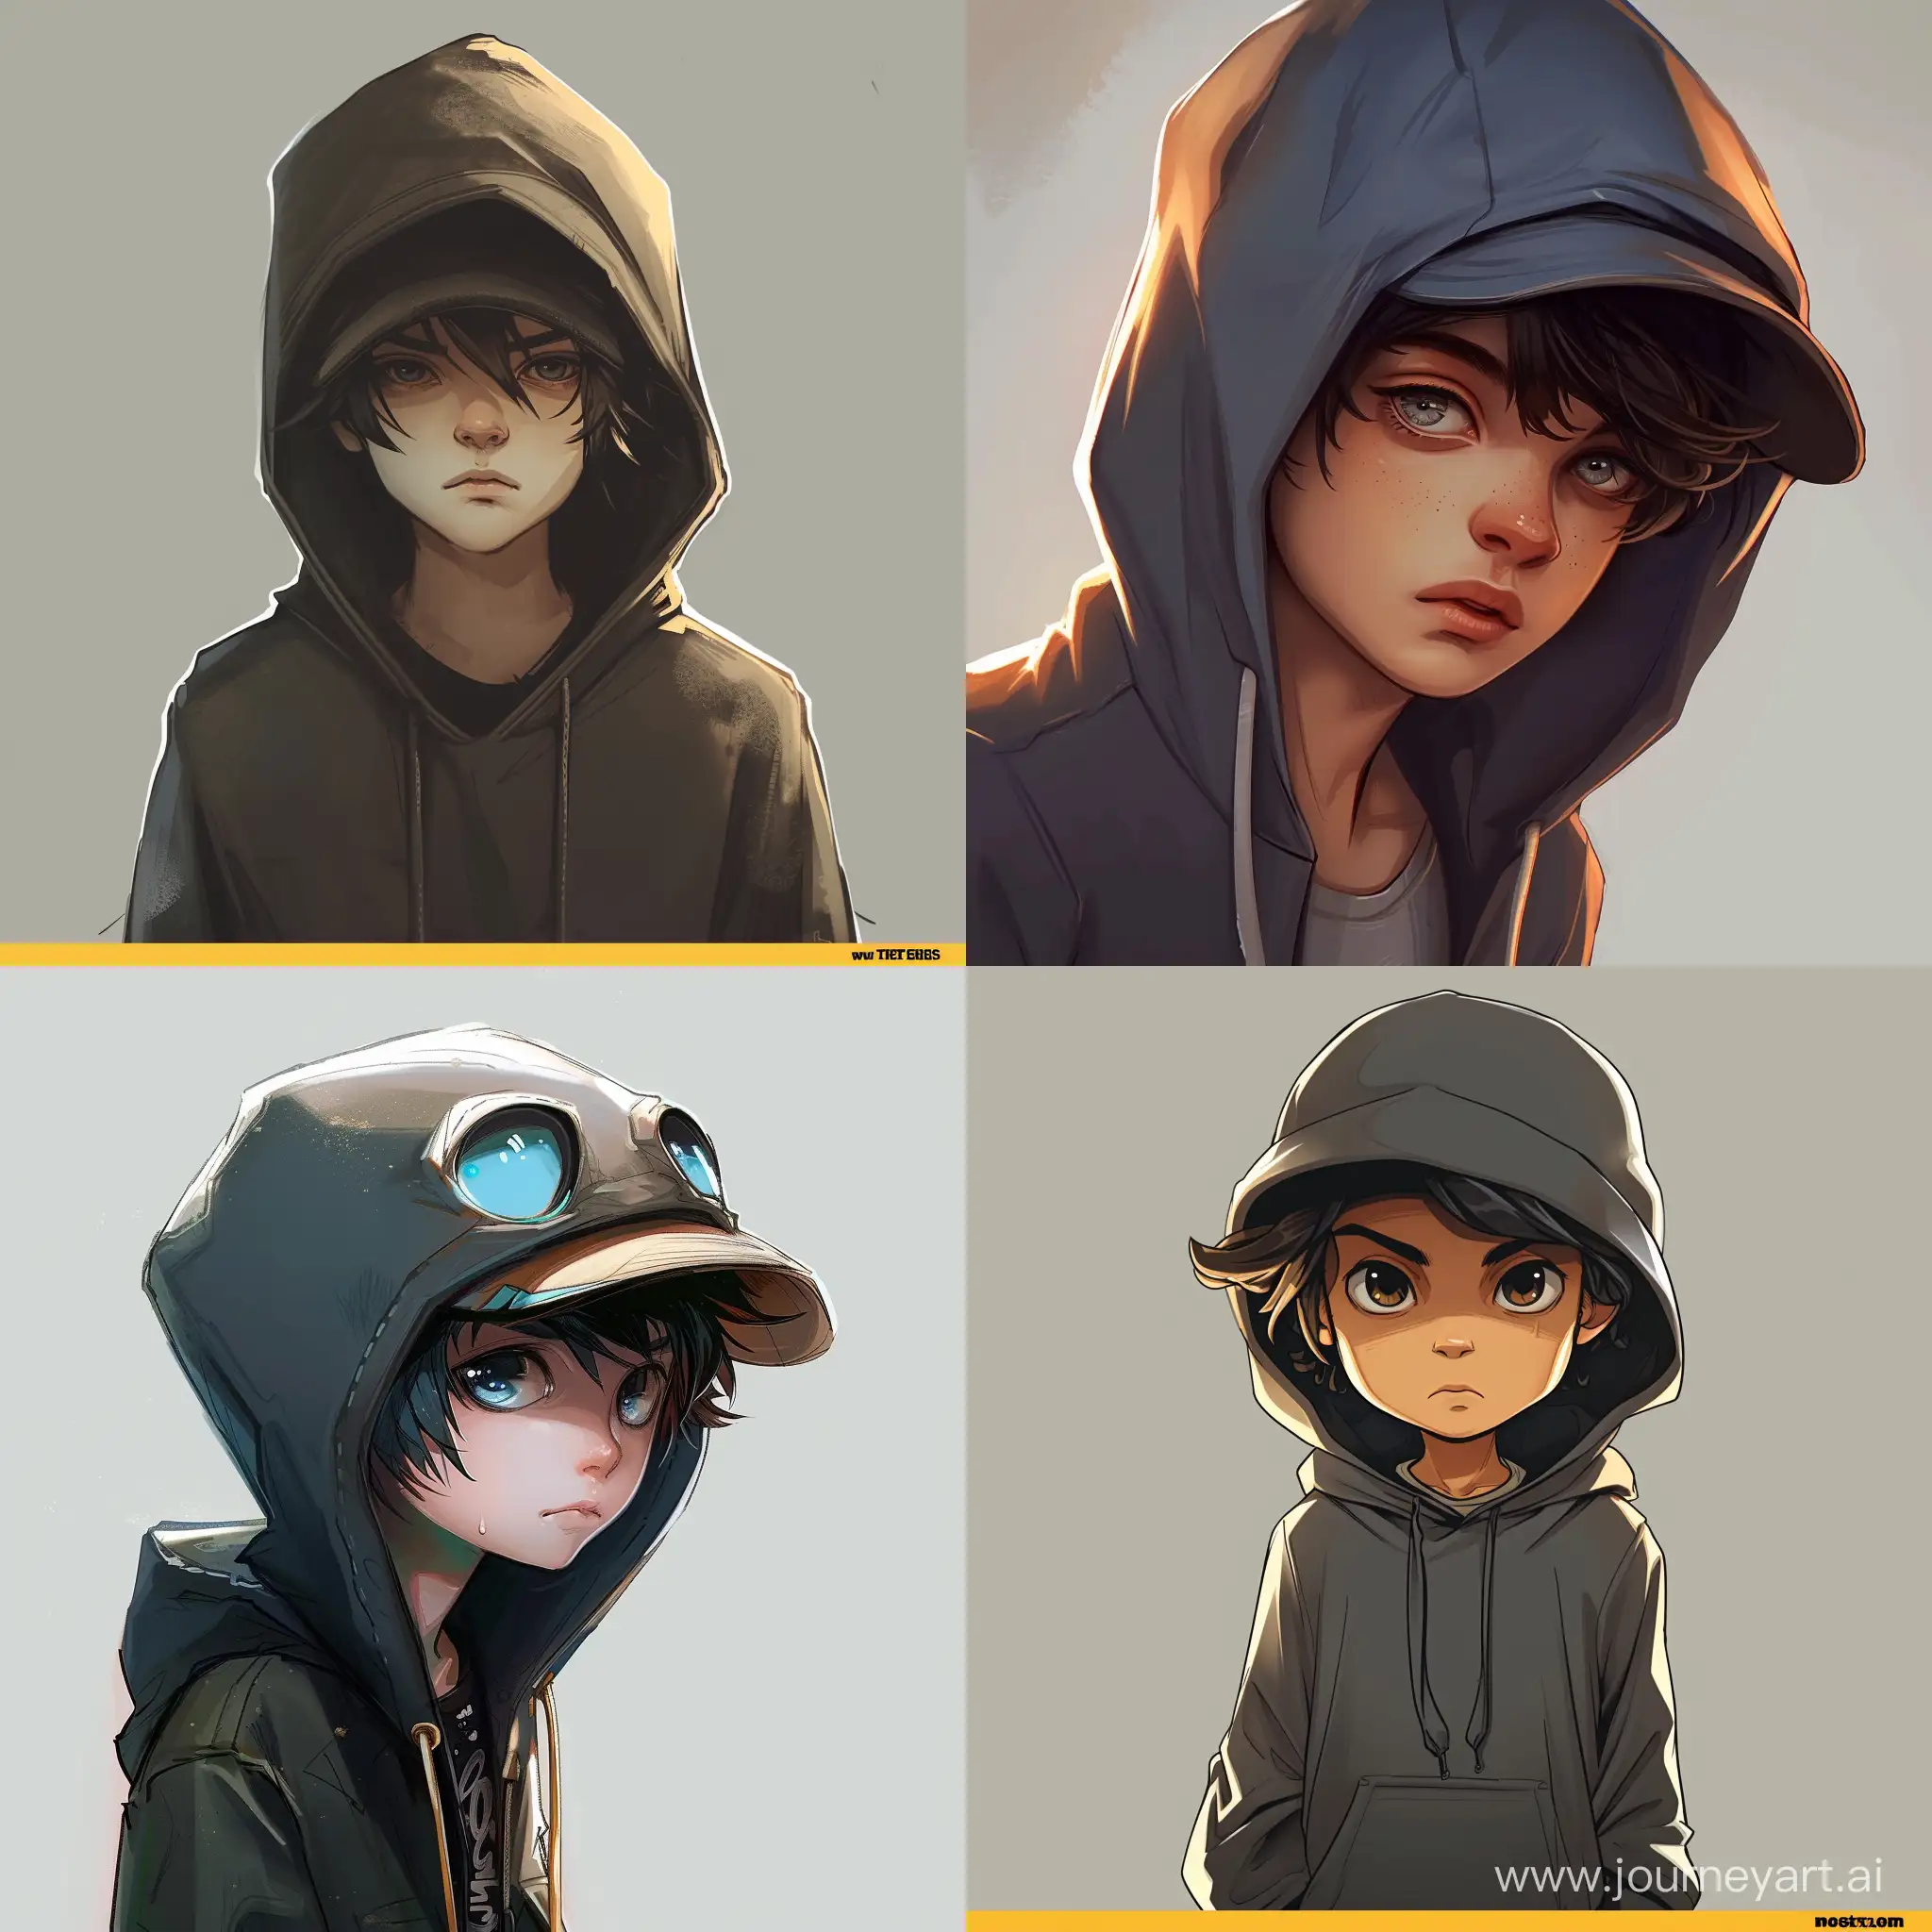 Cool-Boy-Avatar-Art-with-Stylish-Hoodie-and-Hat